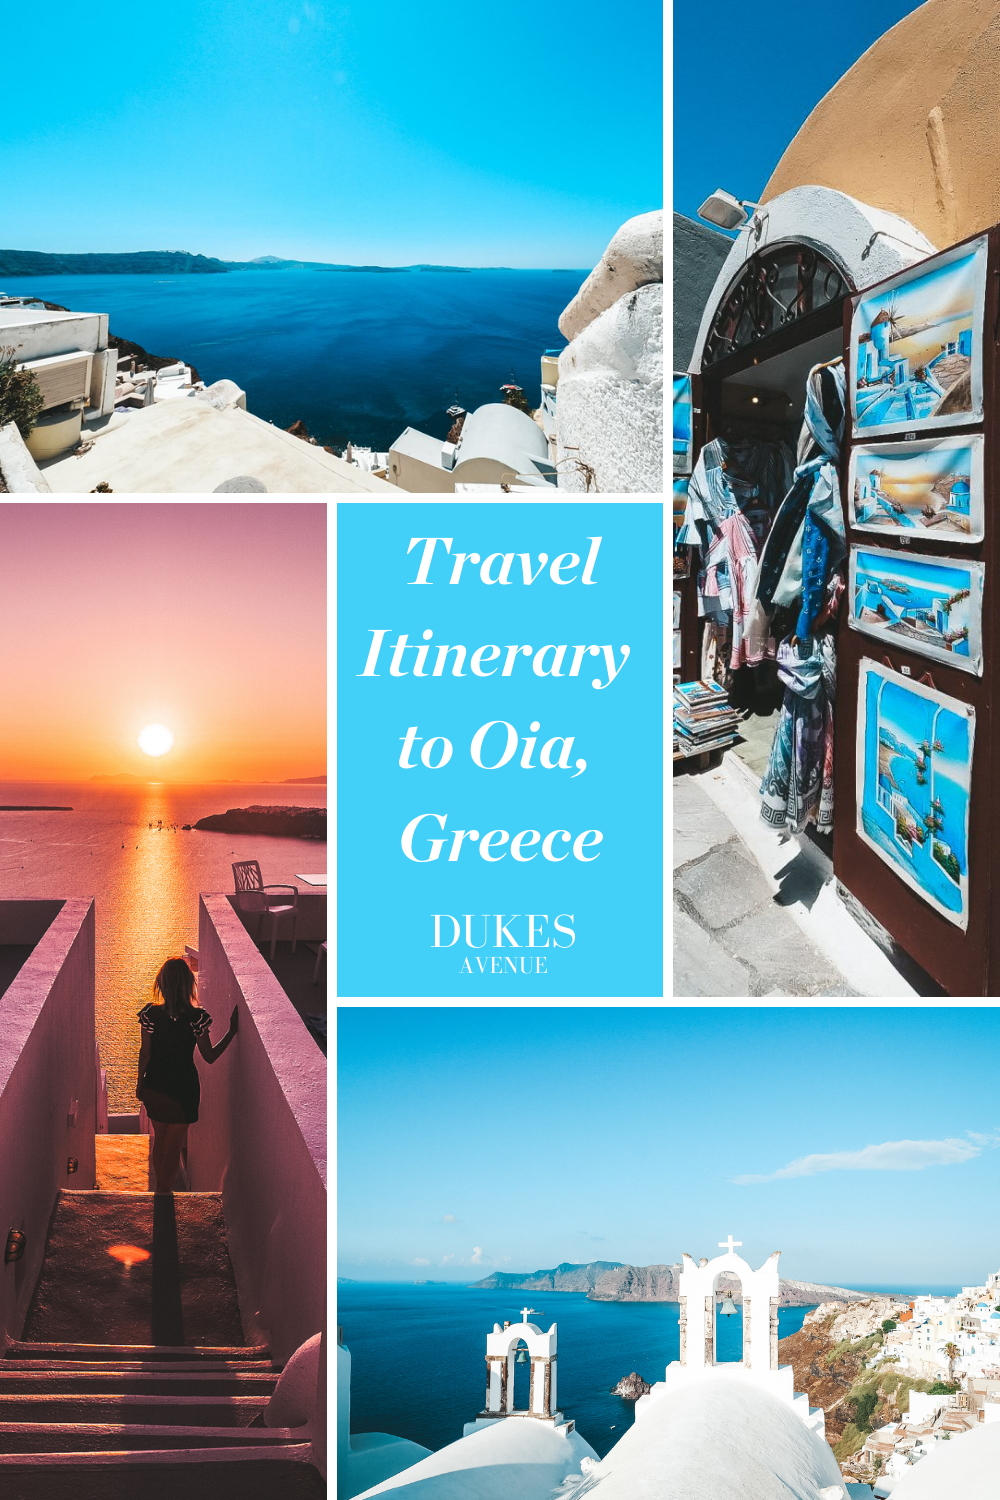 Pictures of the sea, a shop and a sunset with text overlay "Travel Itinerary to Oia, Greece"